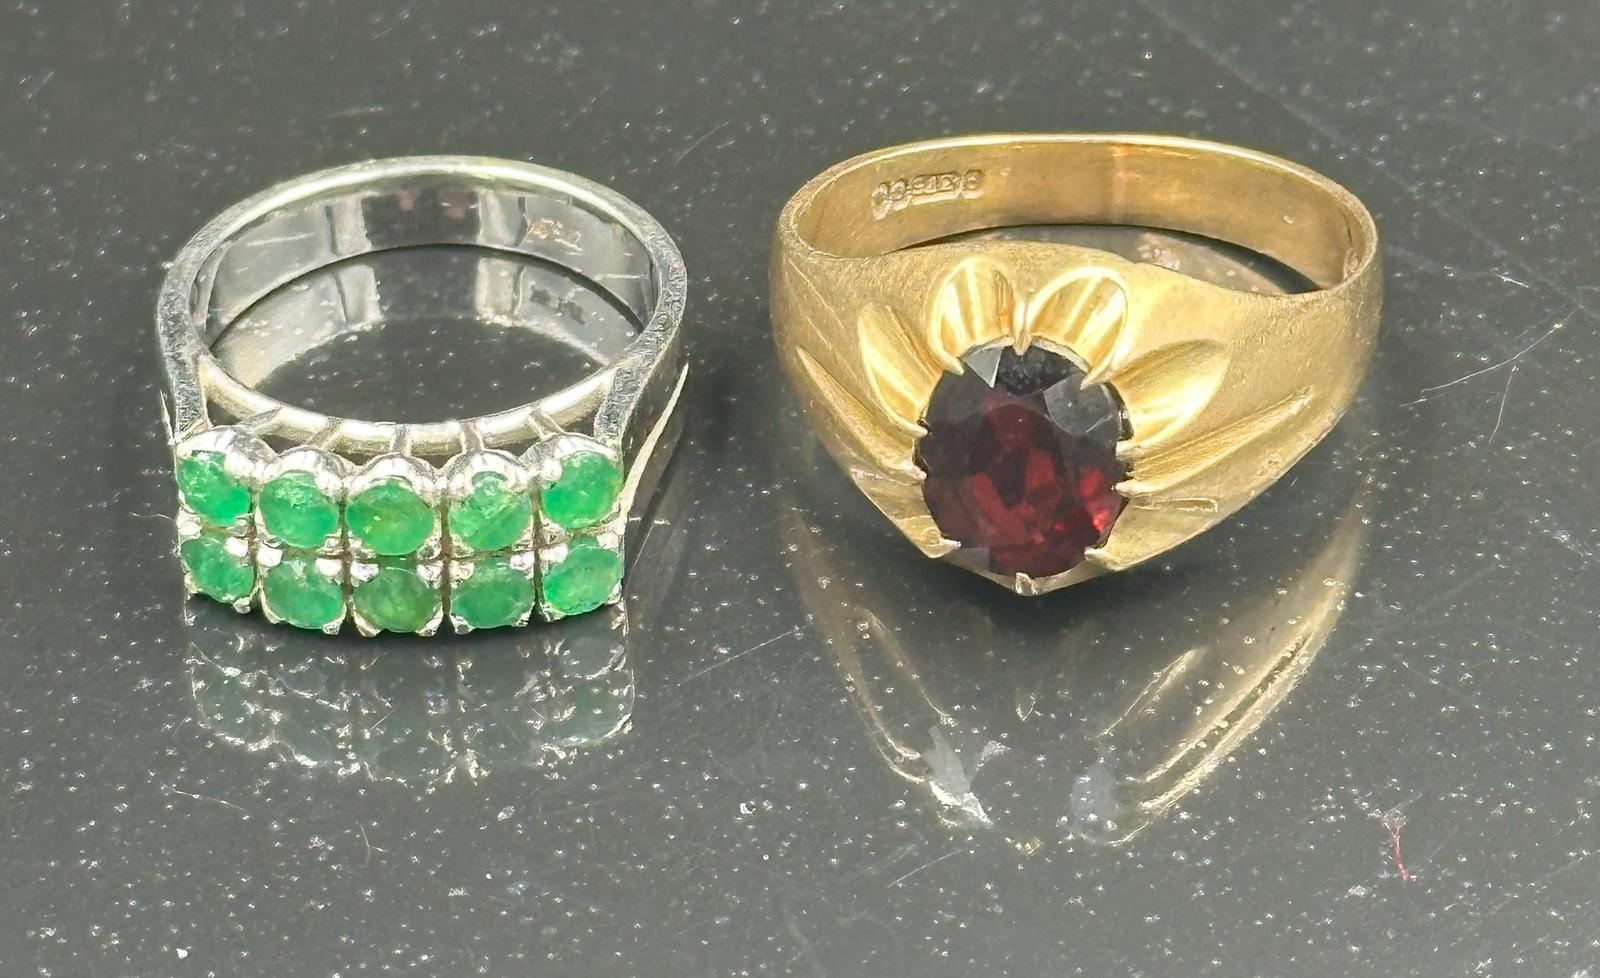 Two 9ct gold fashion rings one with green stnes in two lines on white gold the other a signet ring